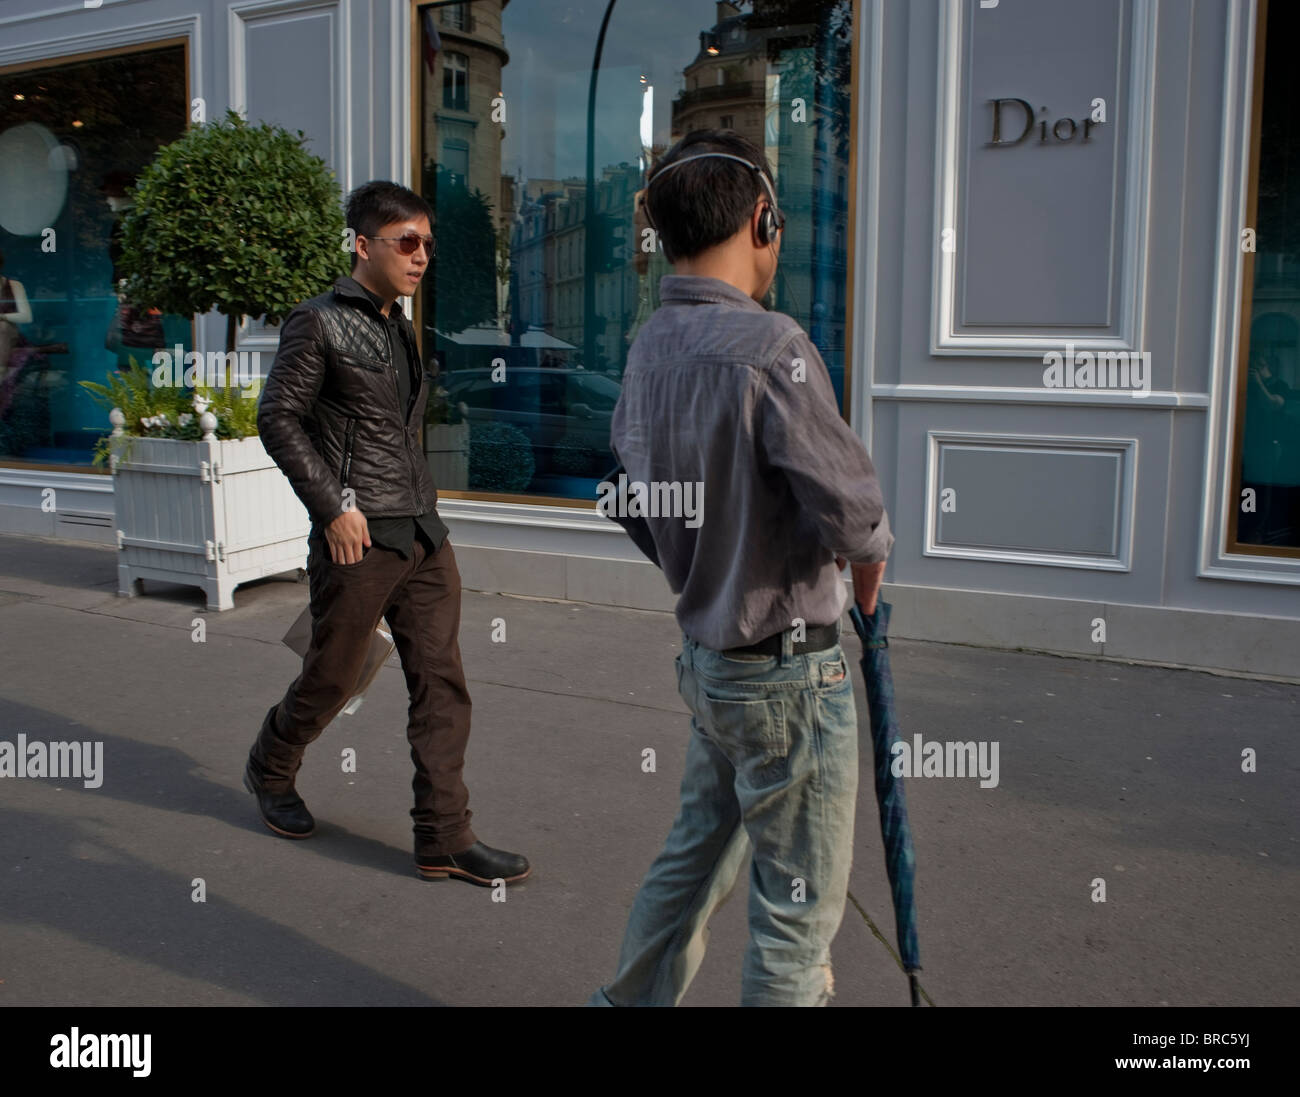 Paris, France, Tourists Walking on dior 30 avenue montaigne, Luxury Shopping Street, man Looking Outside "Christian Dior" Shop Front, people on the streets of Paris, Chinese city, Prestige consumer Stock Photo